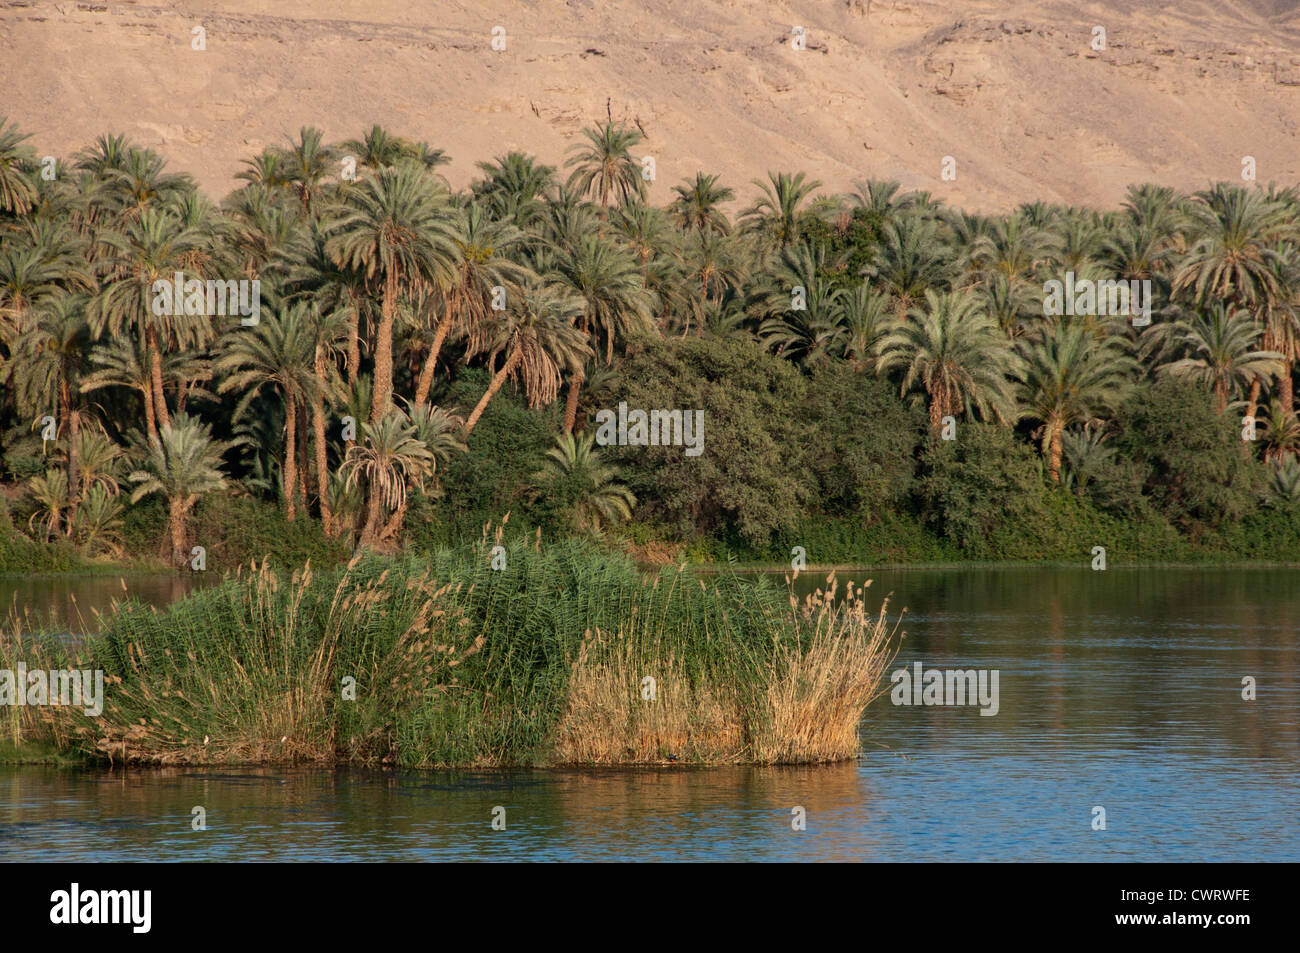 Upper Egypt, Nile river countryside between Luxor and Aswan Stock Photo